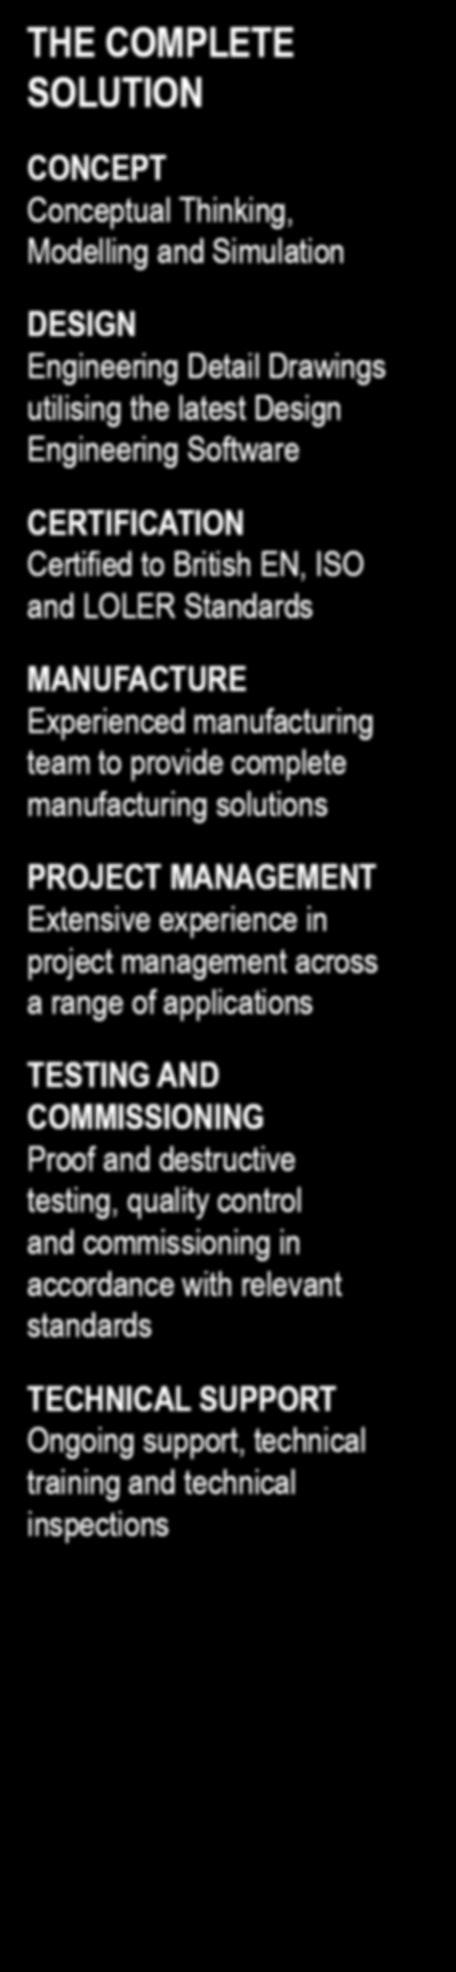 in project management across a range of applications TESTING AND COMMISSIONING Proof and destructive testing, quality control and commissioning in accordance with relevant